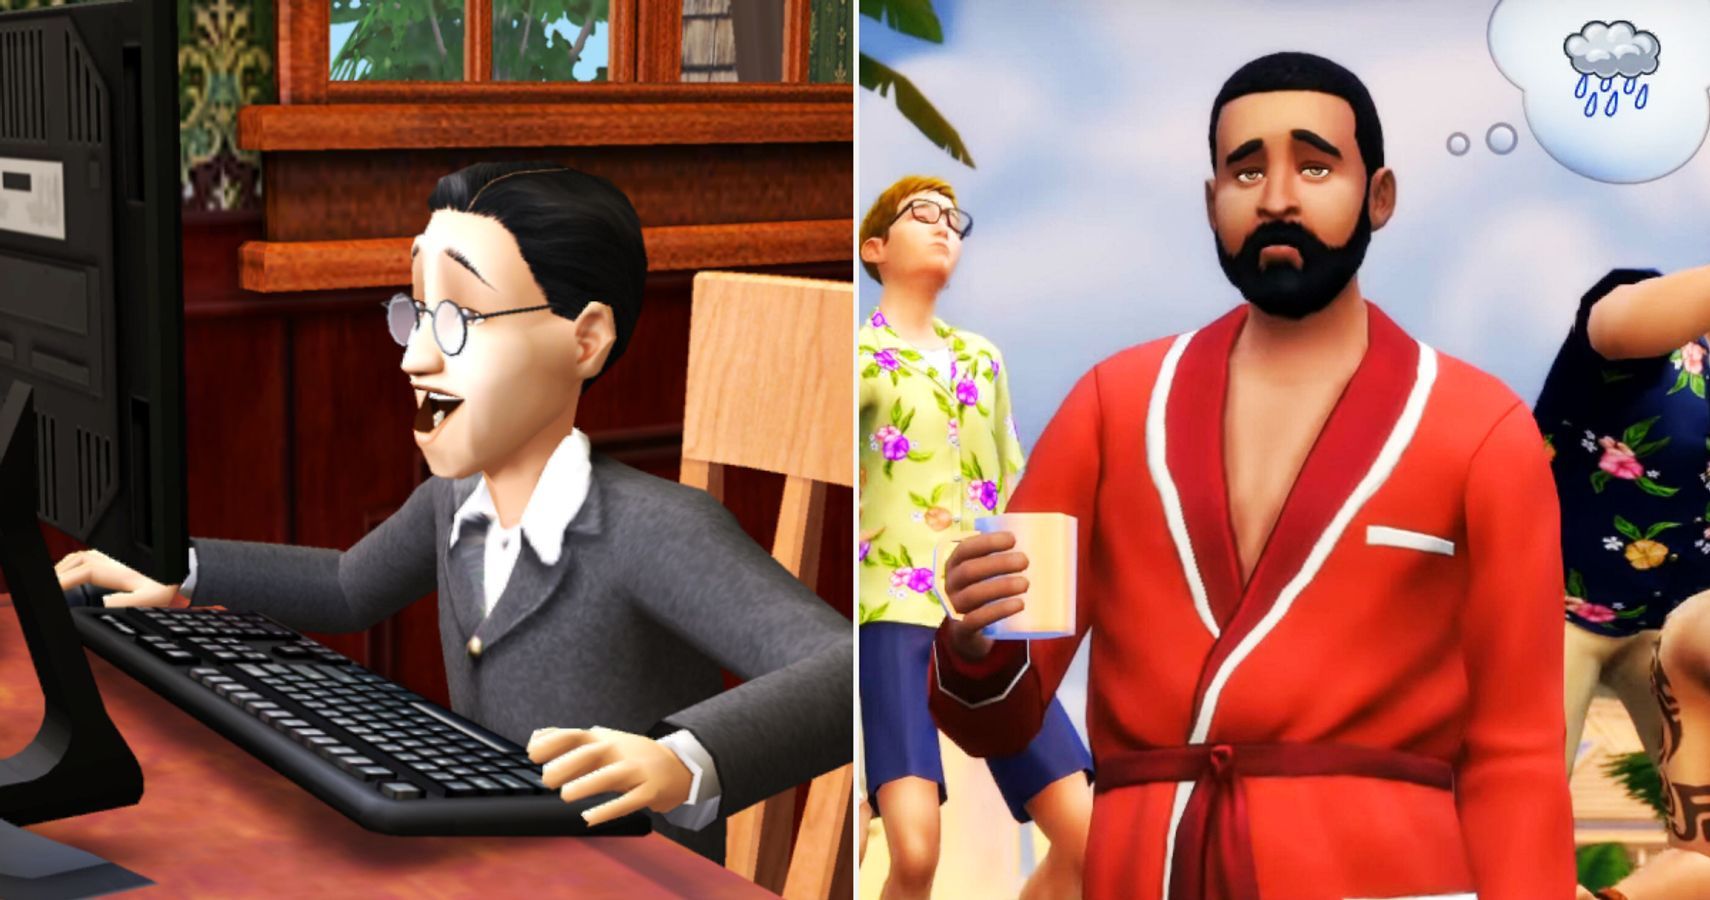 The Sims 5: 5 Mistakes From TS4 They Will Need to Avoid (& 5 Things